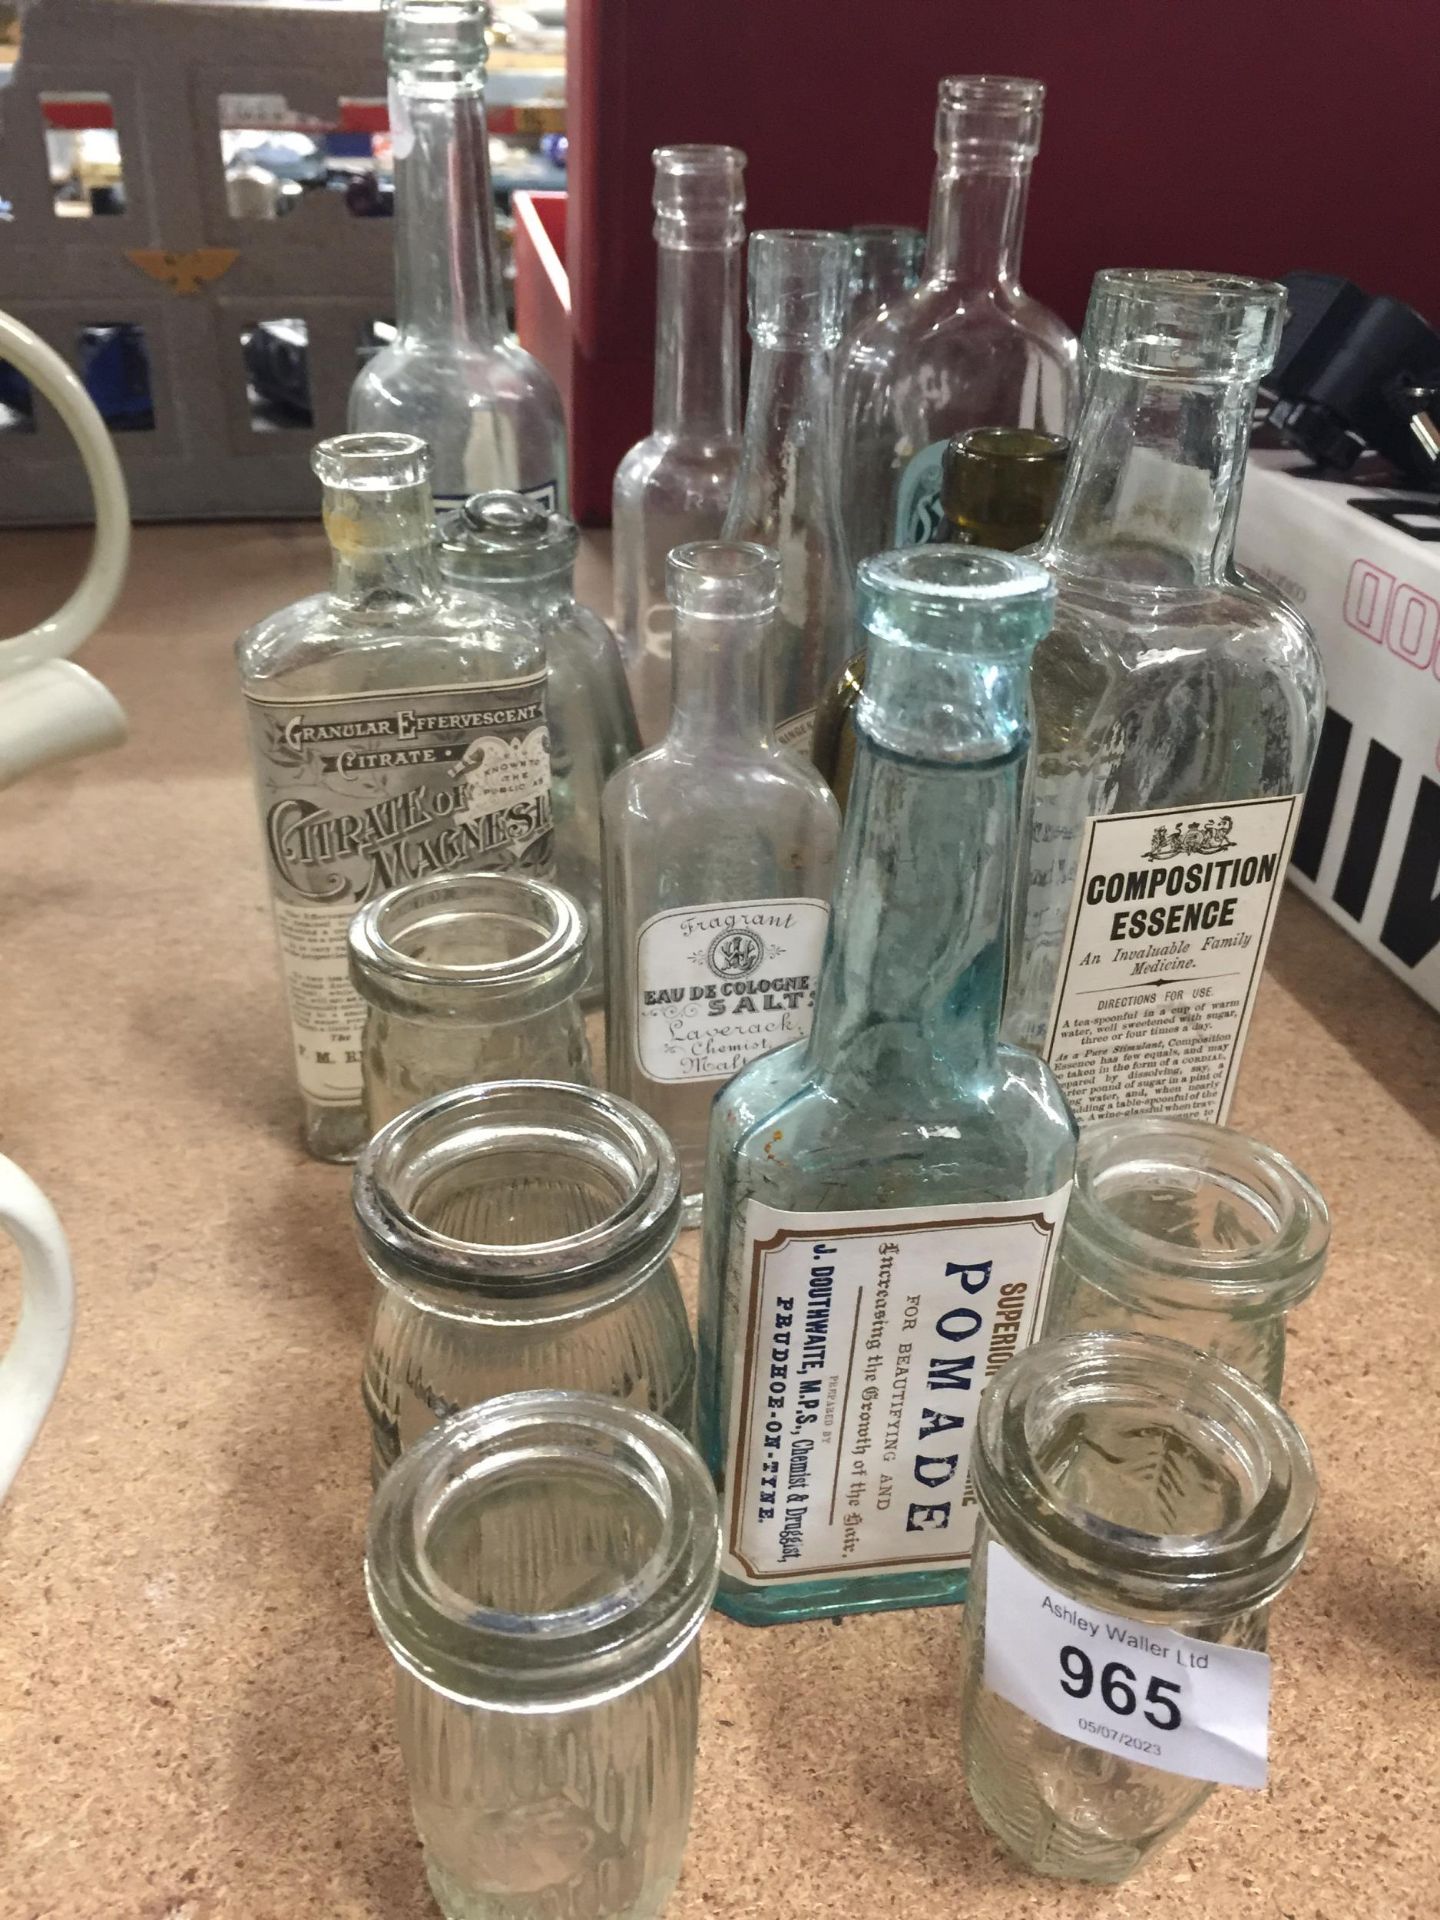 ACOLLECTION OF VINTAGE ADVERTISING BOTTLES TO INCLUDE OXO, LAVENDER WATER, SYRUP OF FIGS, ETC - Bild 2 aus 2